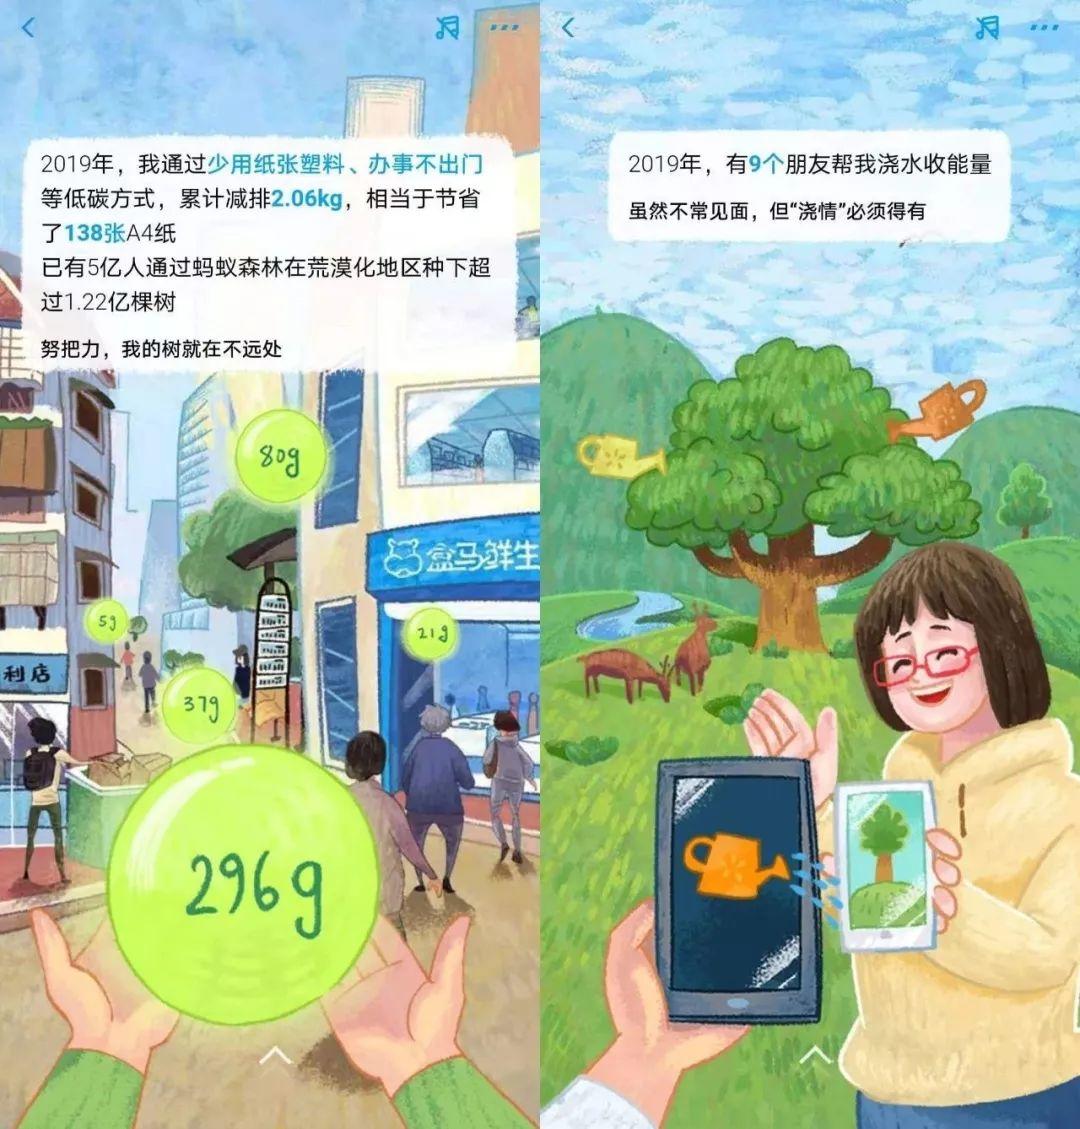 Alipay Says I'm Richer than My Imagination! Unbelievable!